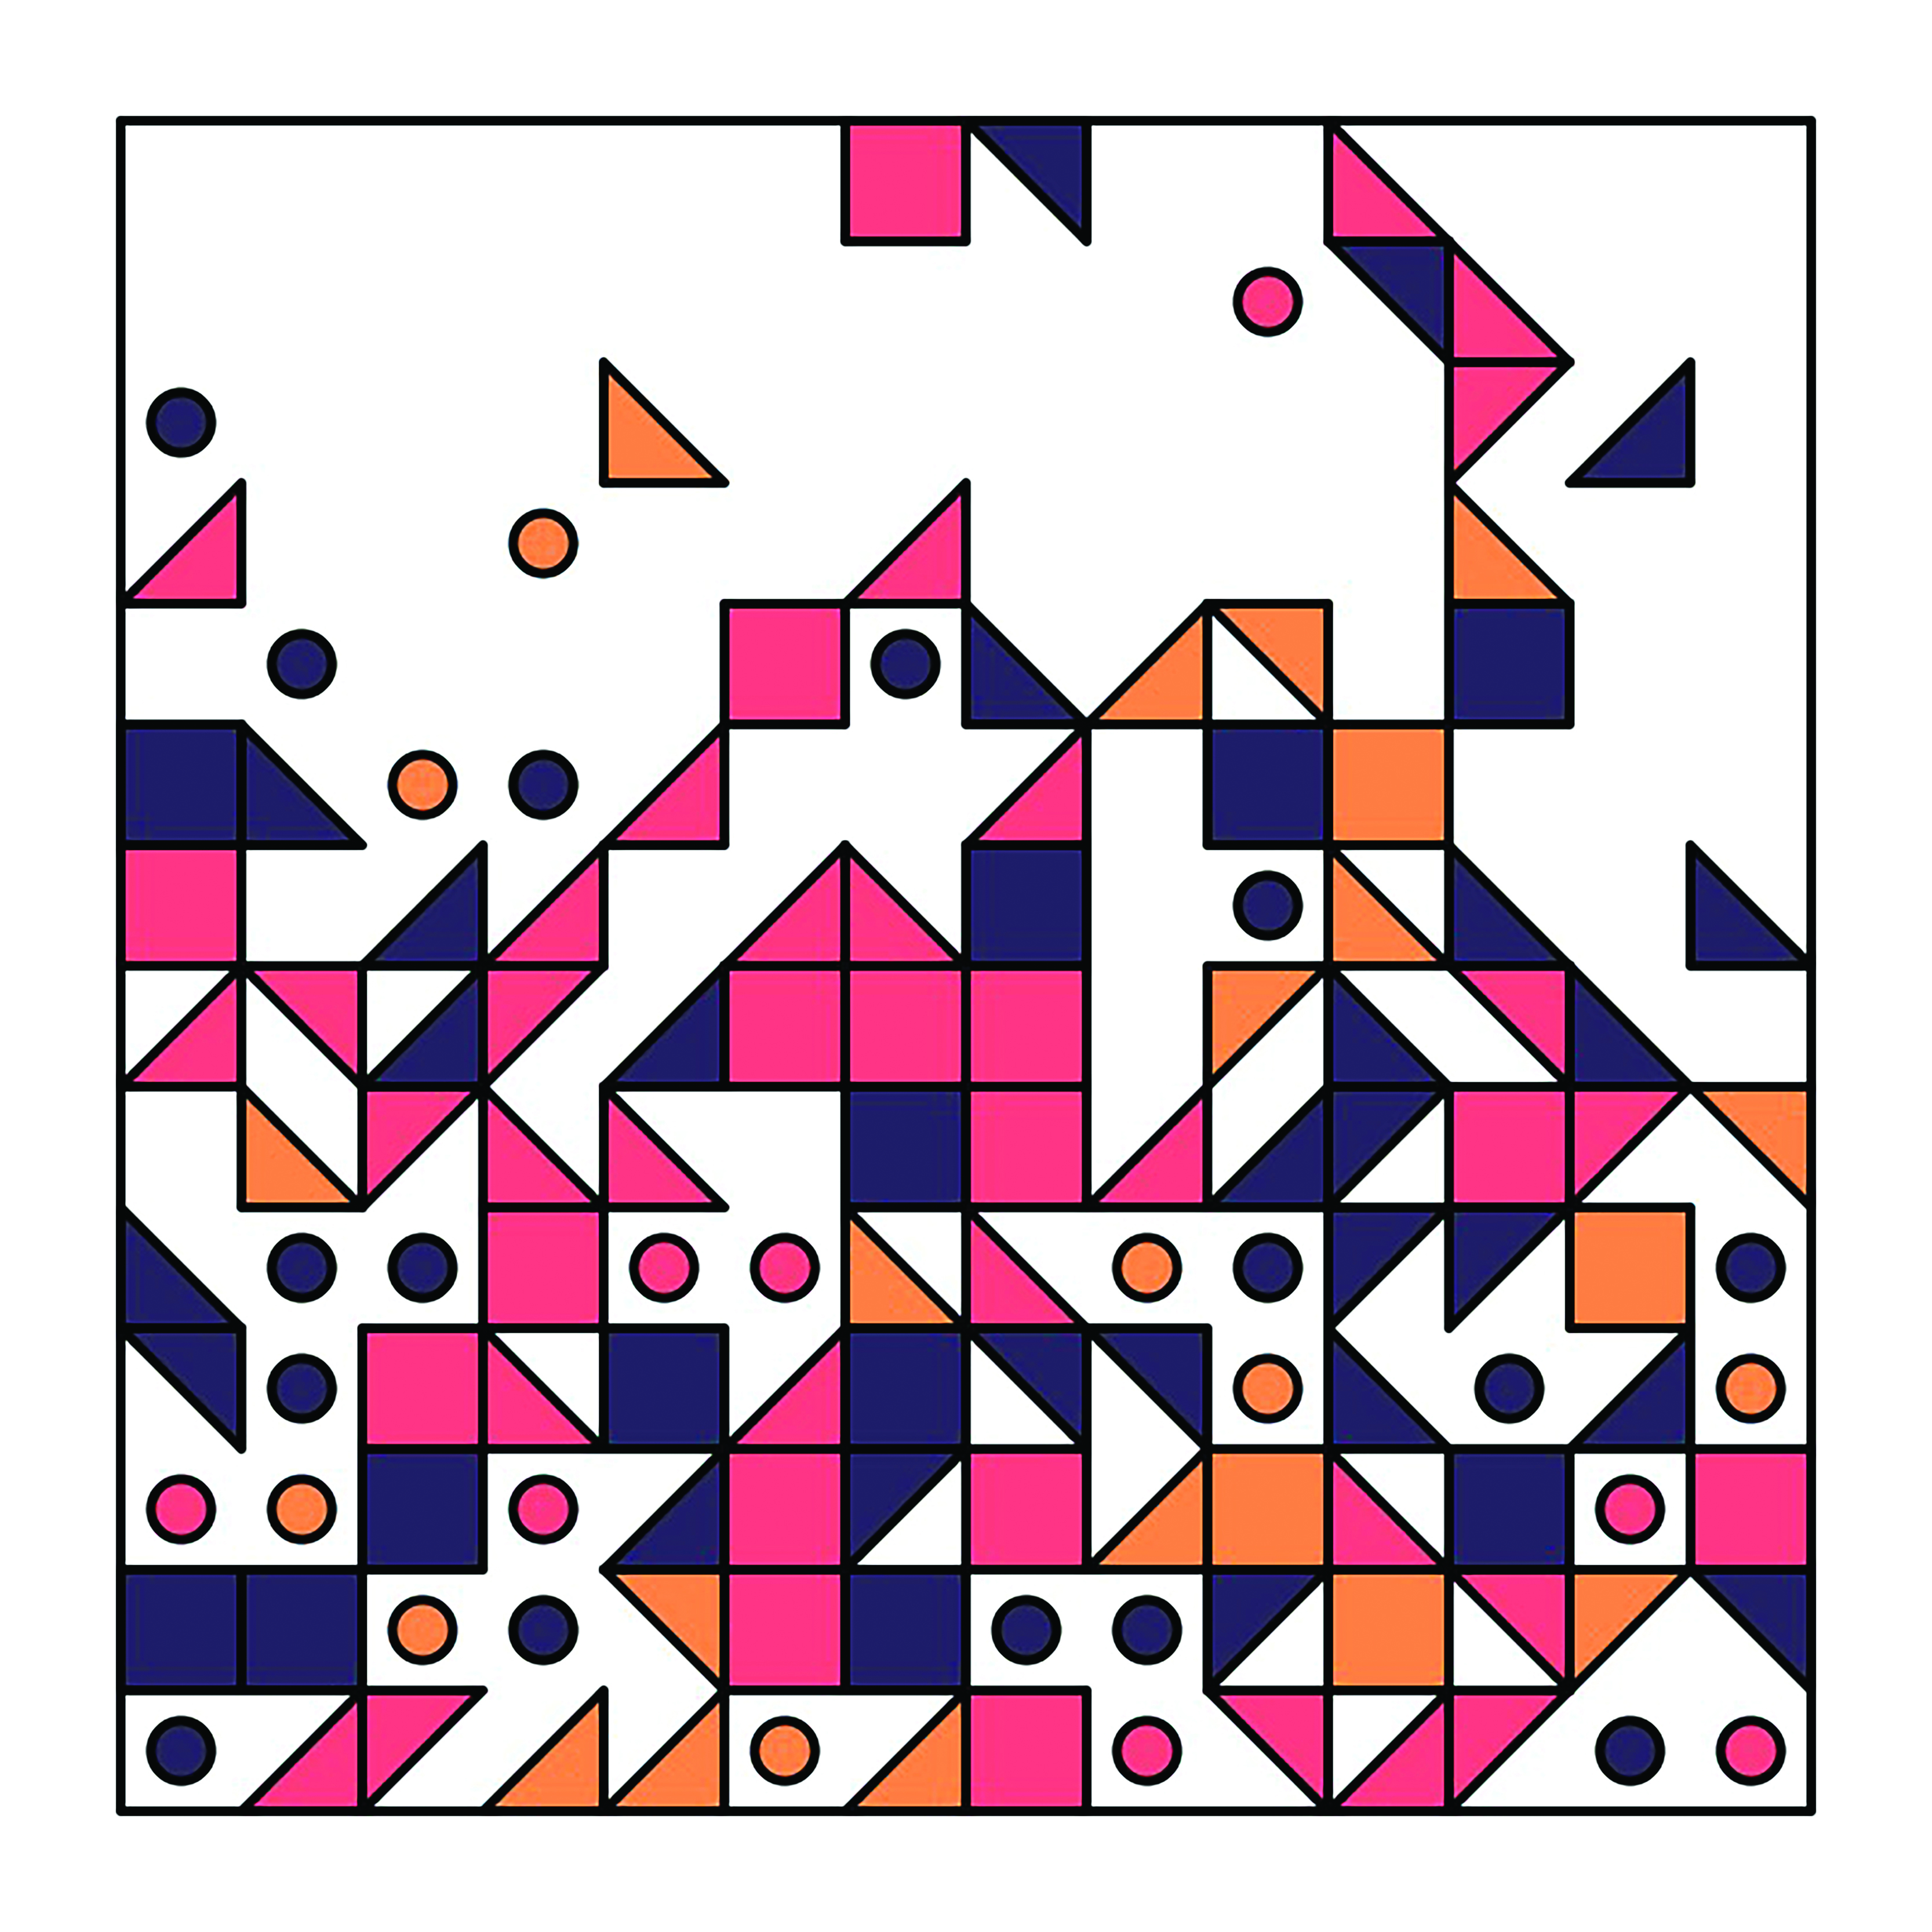 A square-shaped generative art piece of with various squares, circles, and triangles colored pink, purple, and orange.